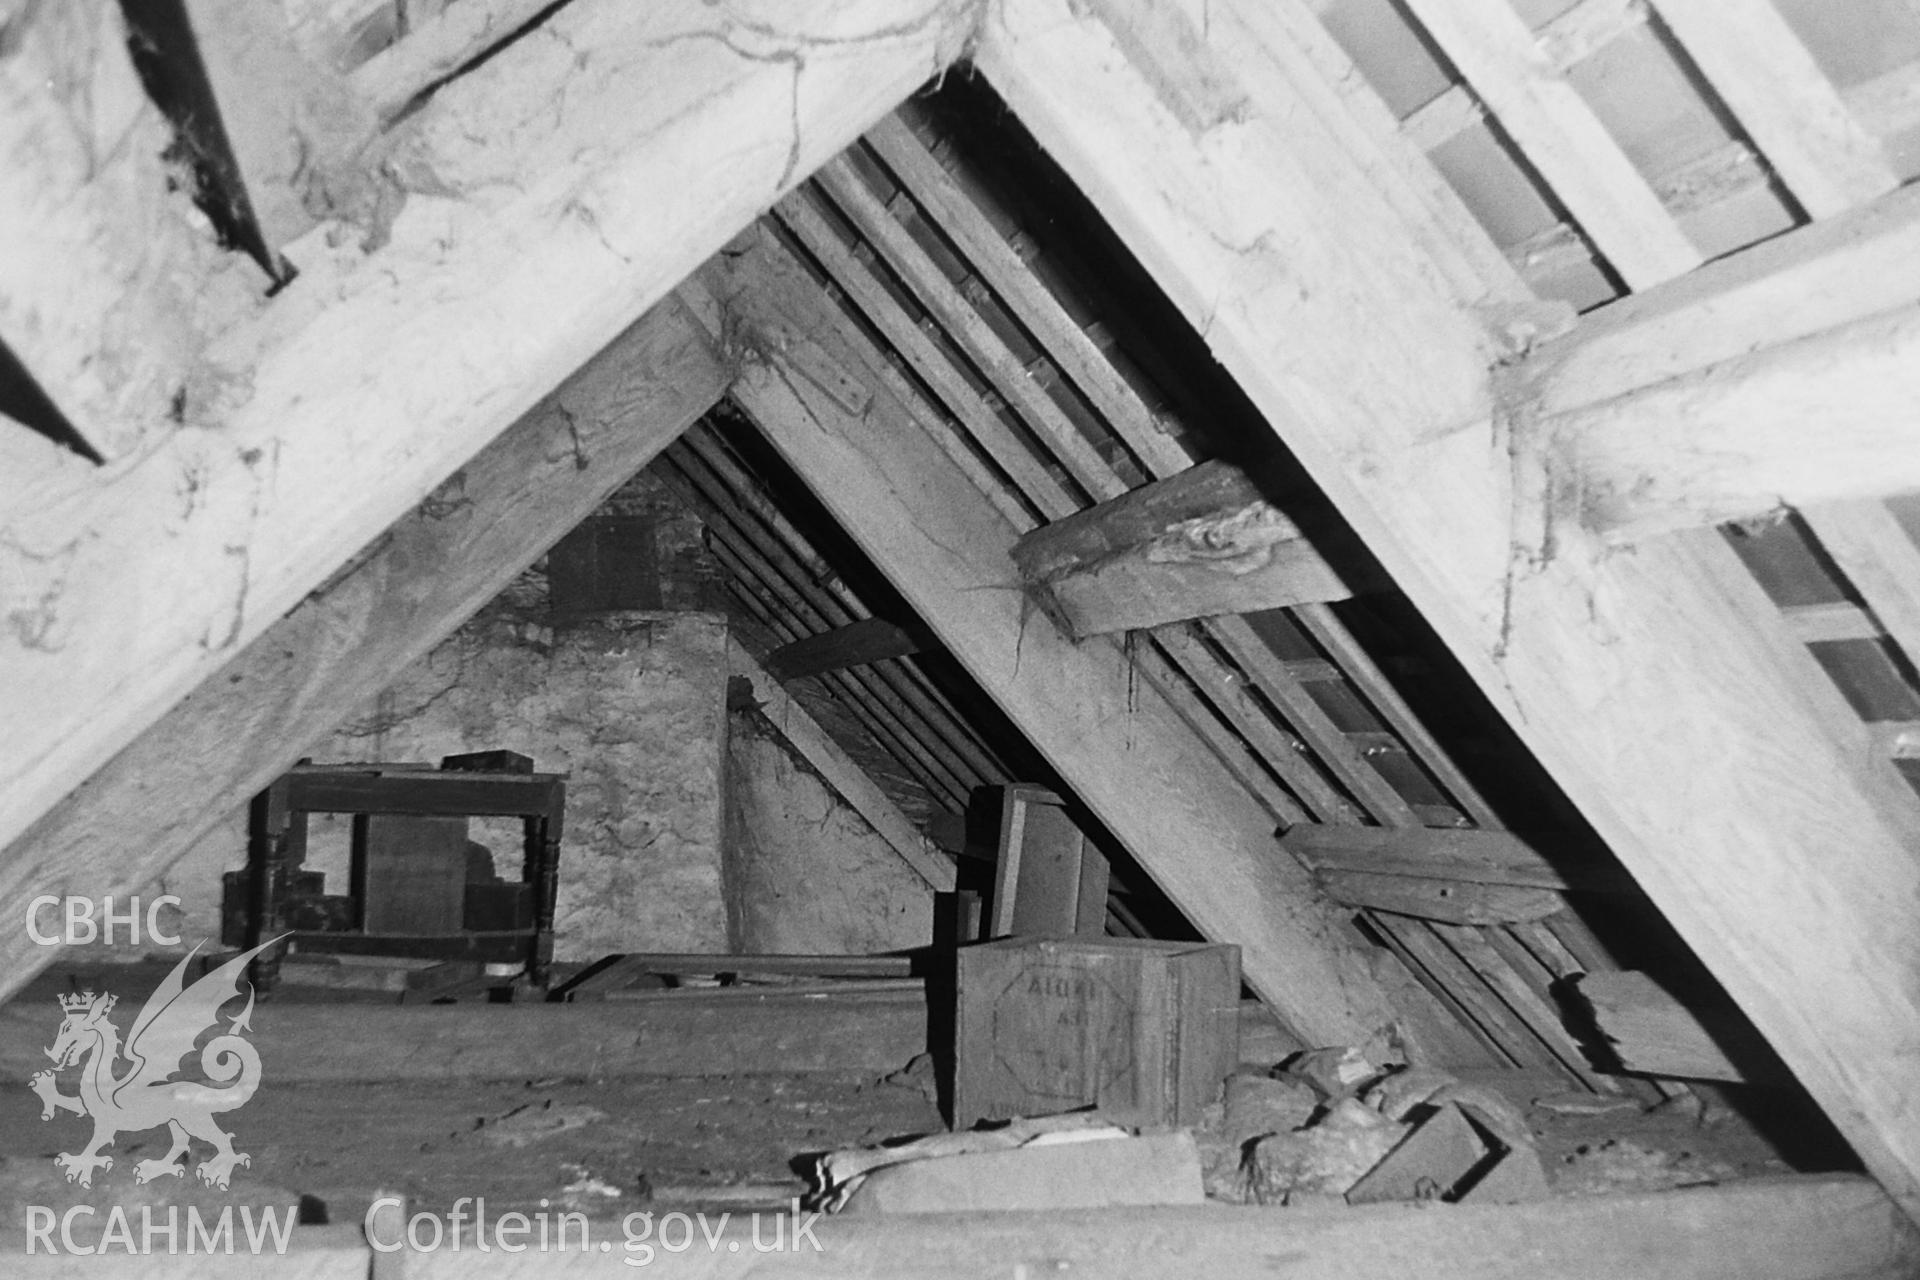 Black and white photo showing interior view of Tyntyle, taken by Paul R. Davis, 1990.